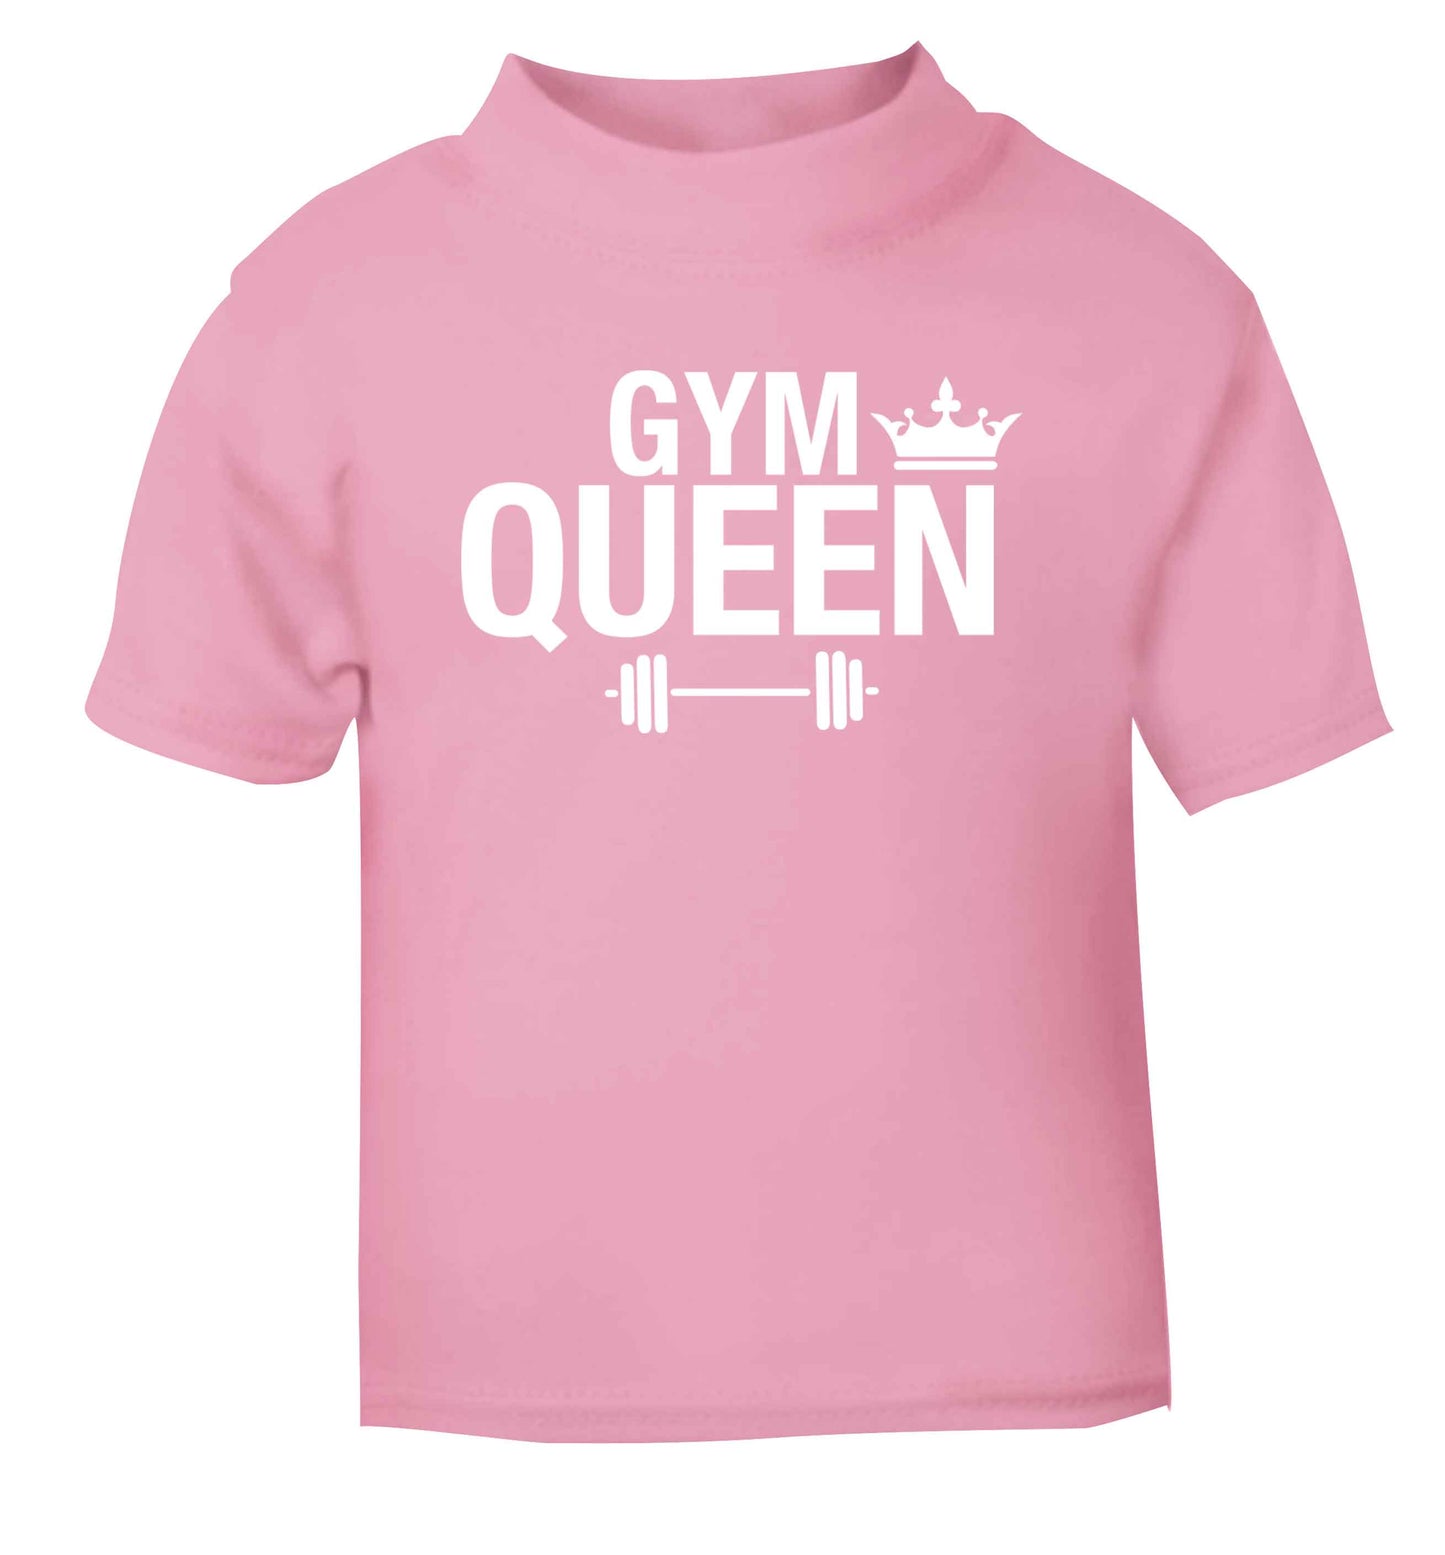 Gym queen light pink Baby Toddler Tshirt 2 Years